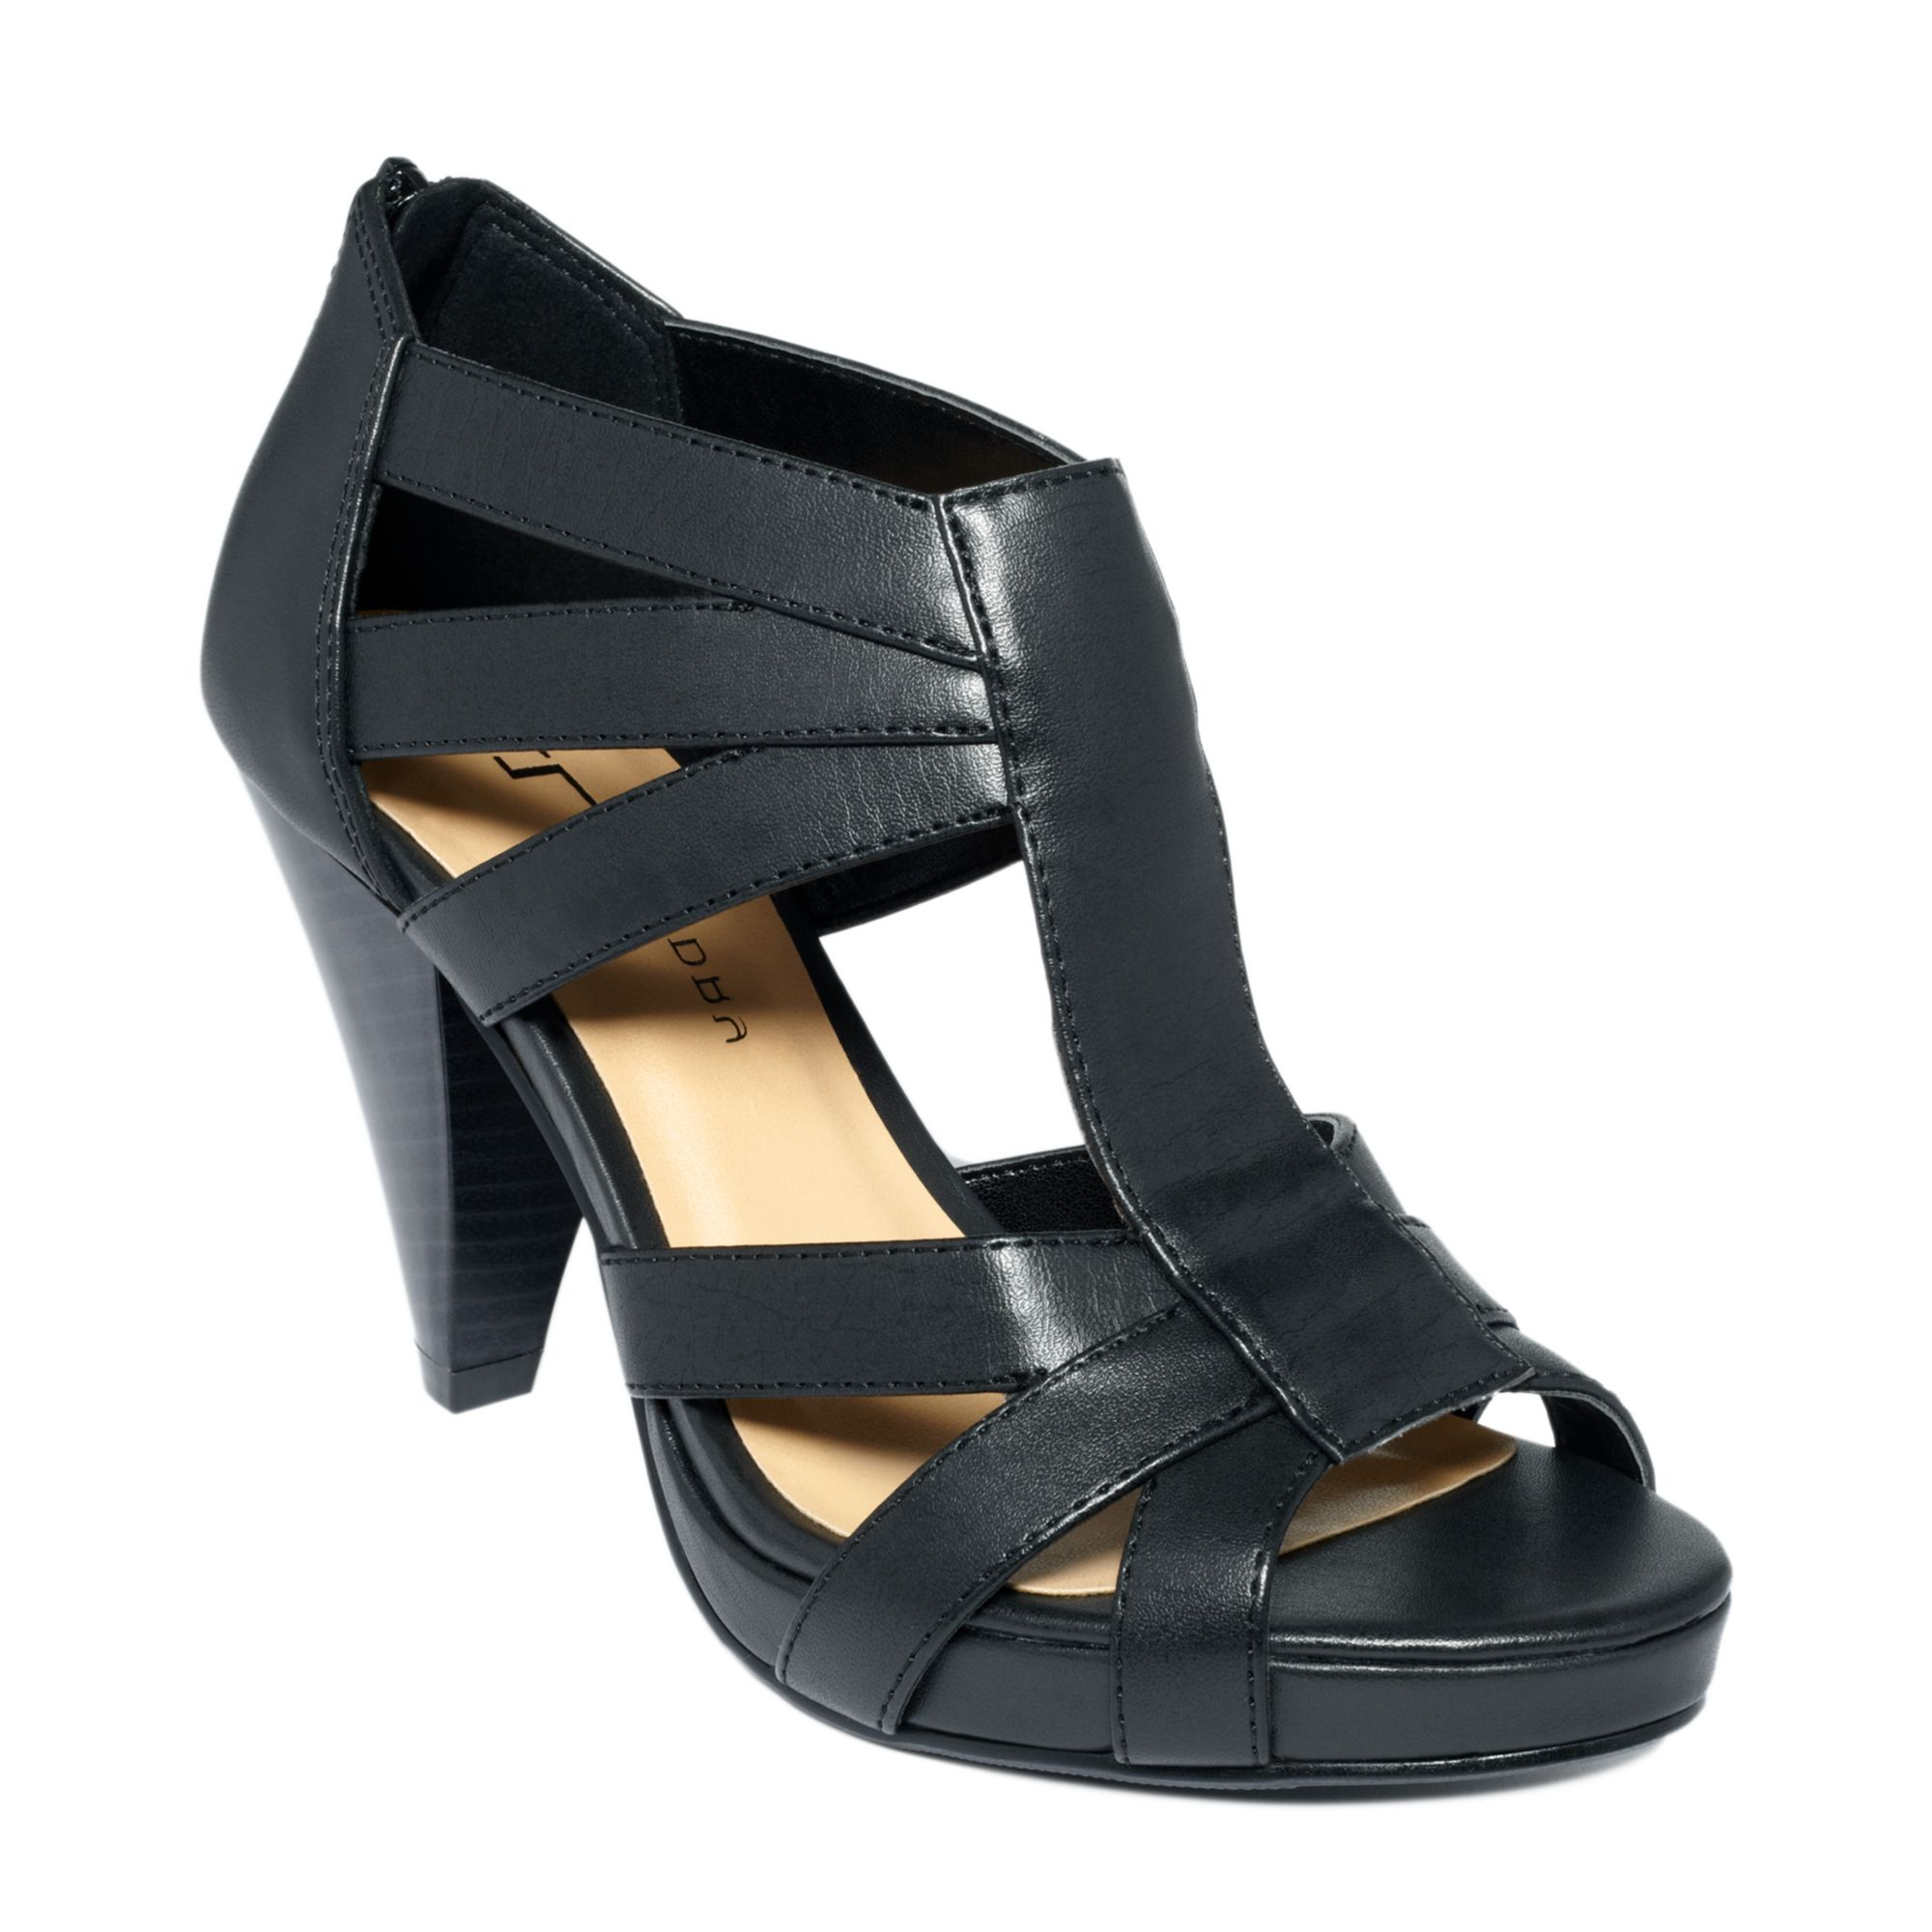 Chinese Laundry Whitney Platform Sandals in Black | Lyst